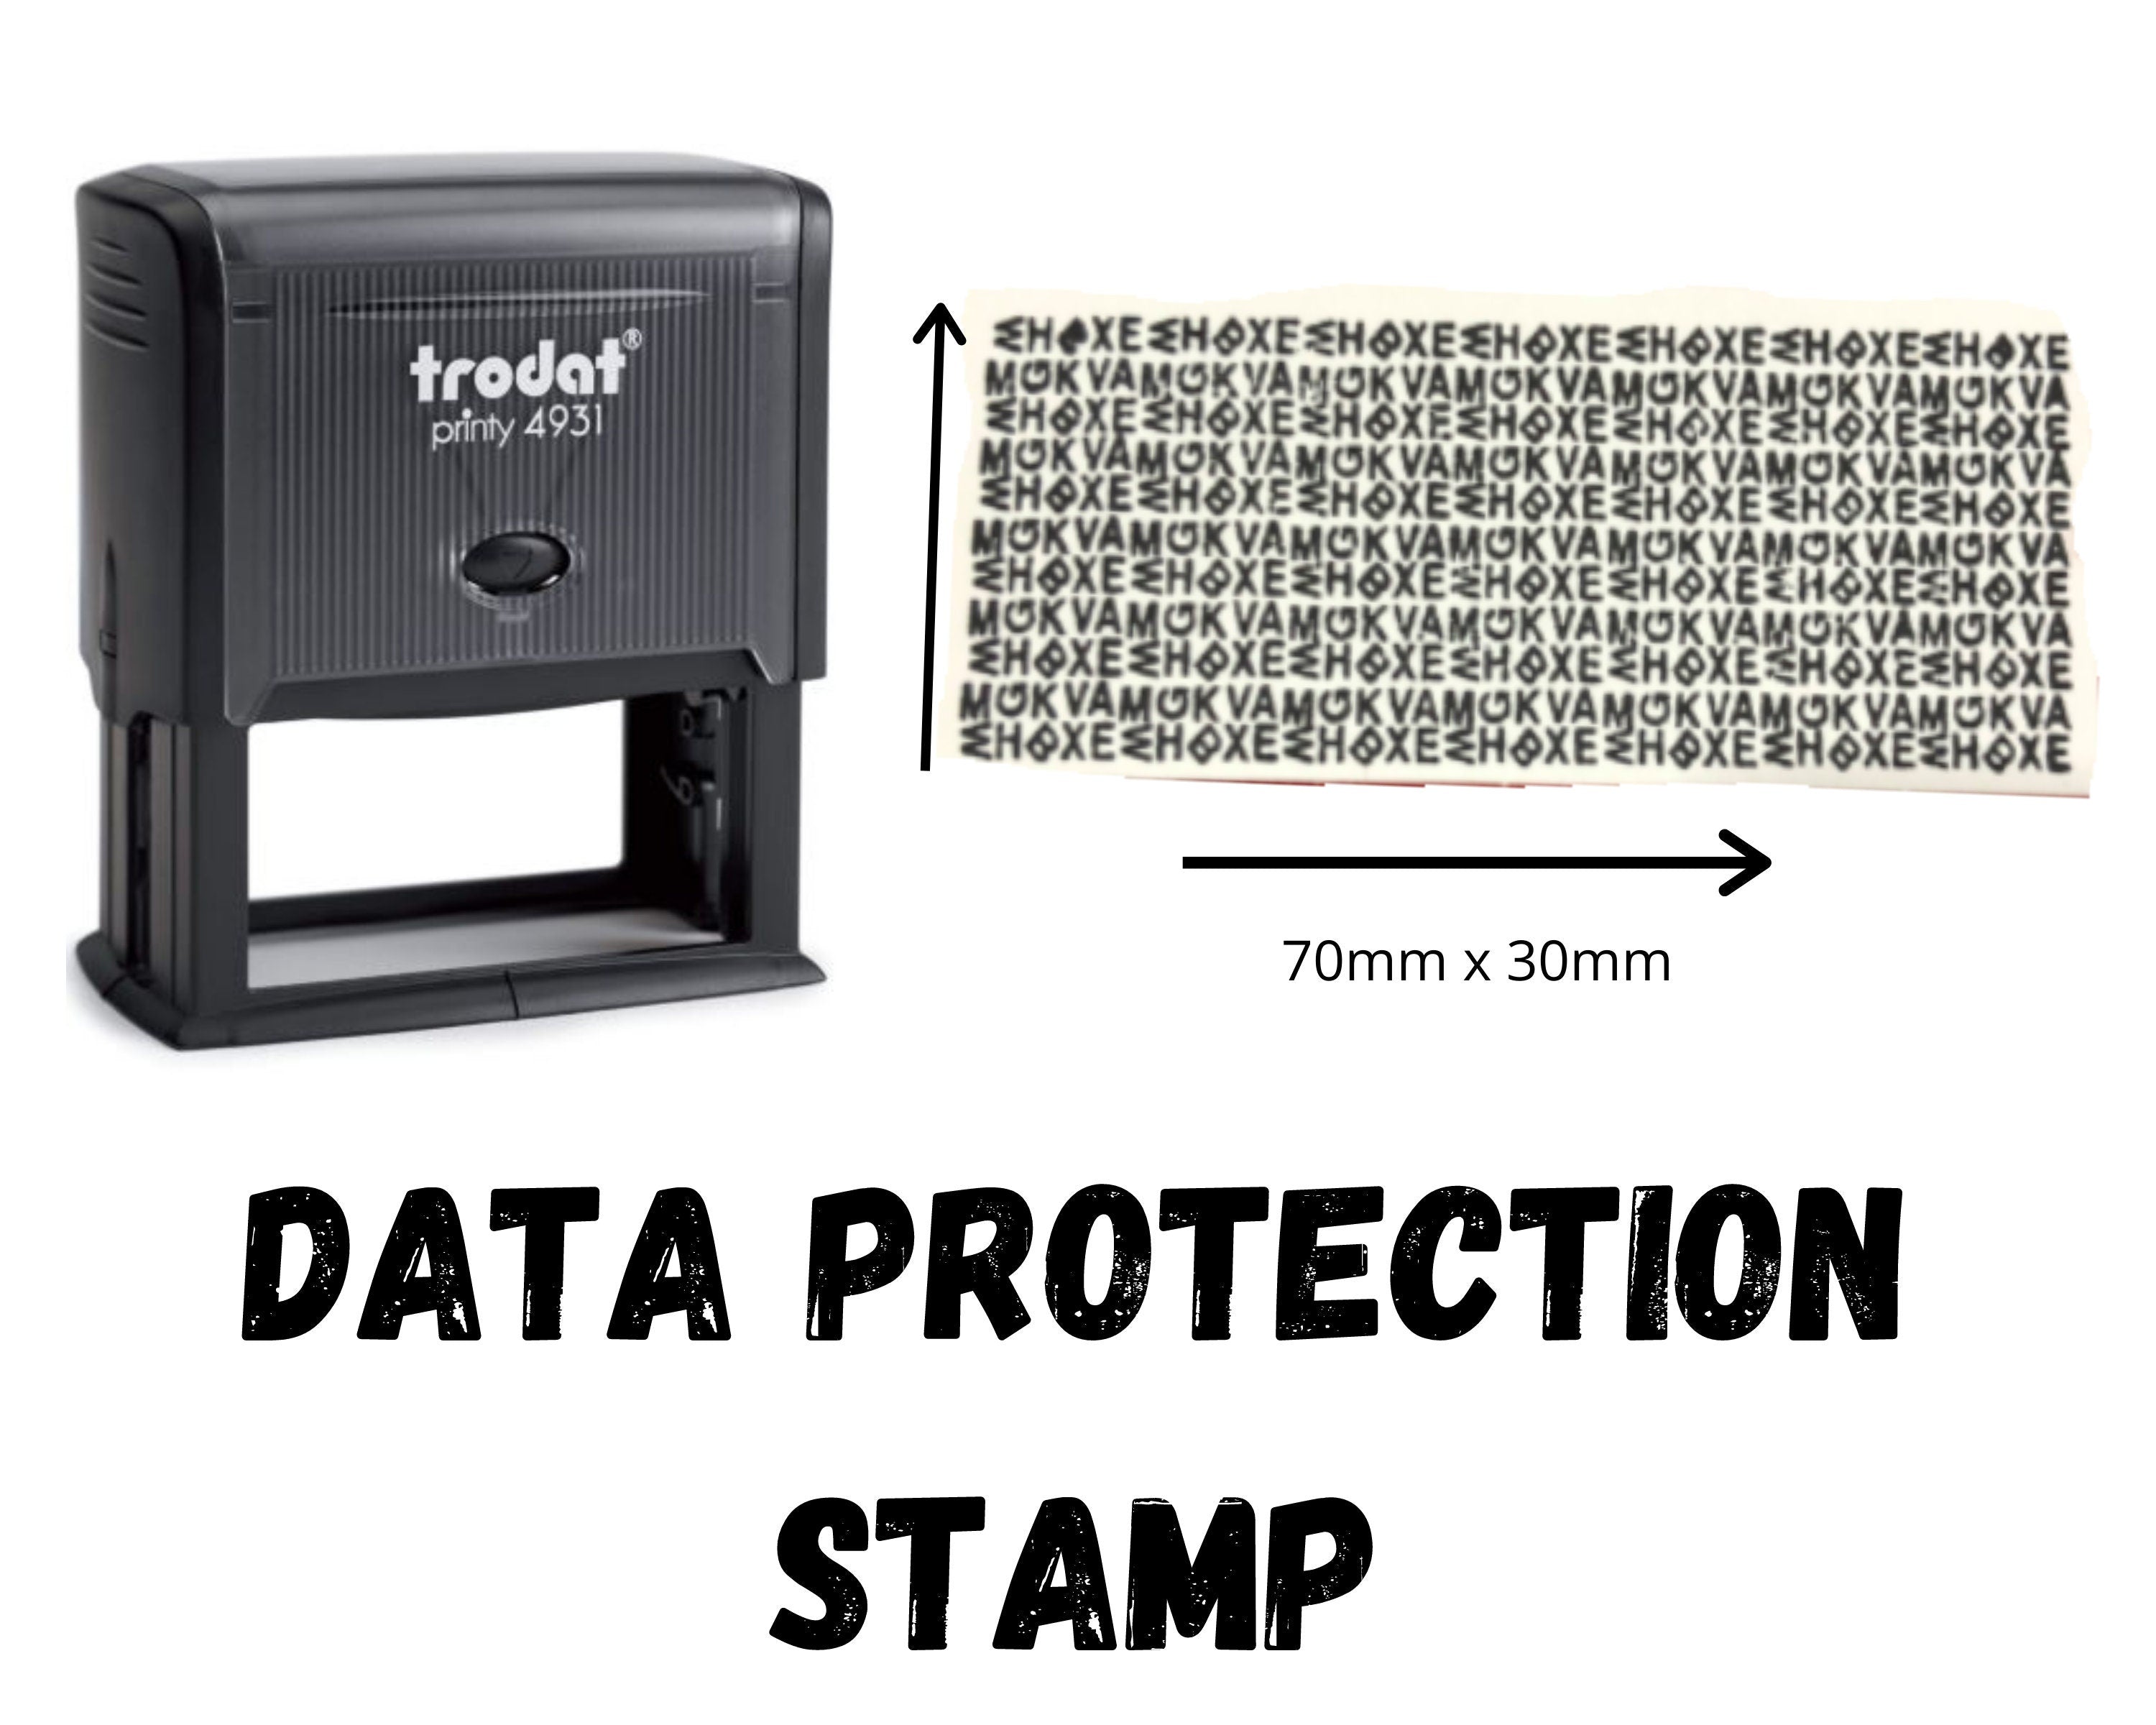 Privacy Stamp, Data Protection Stamp